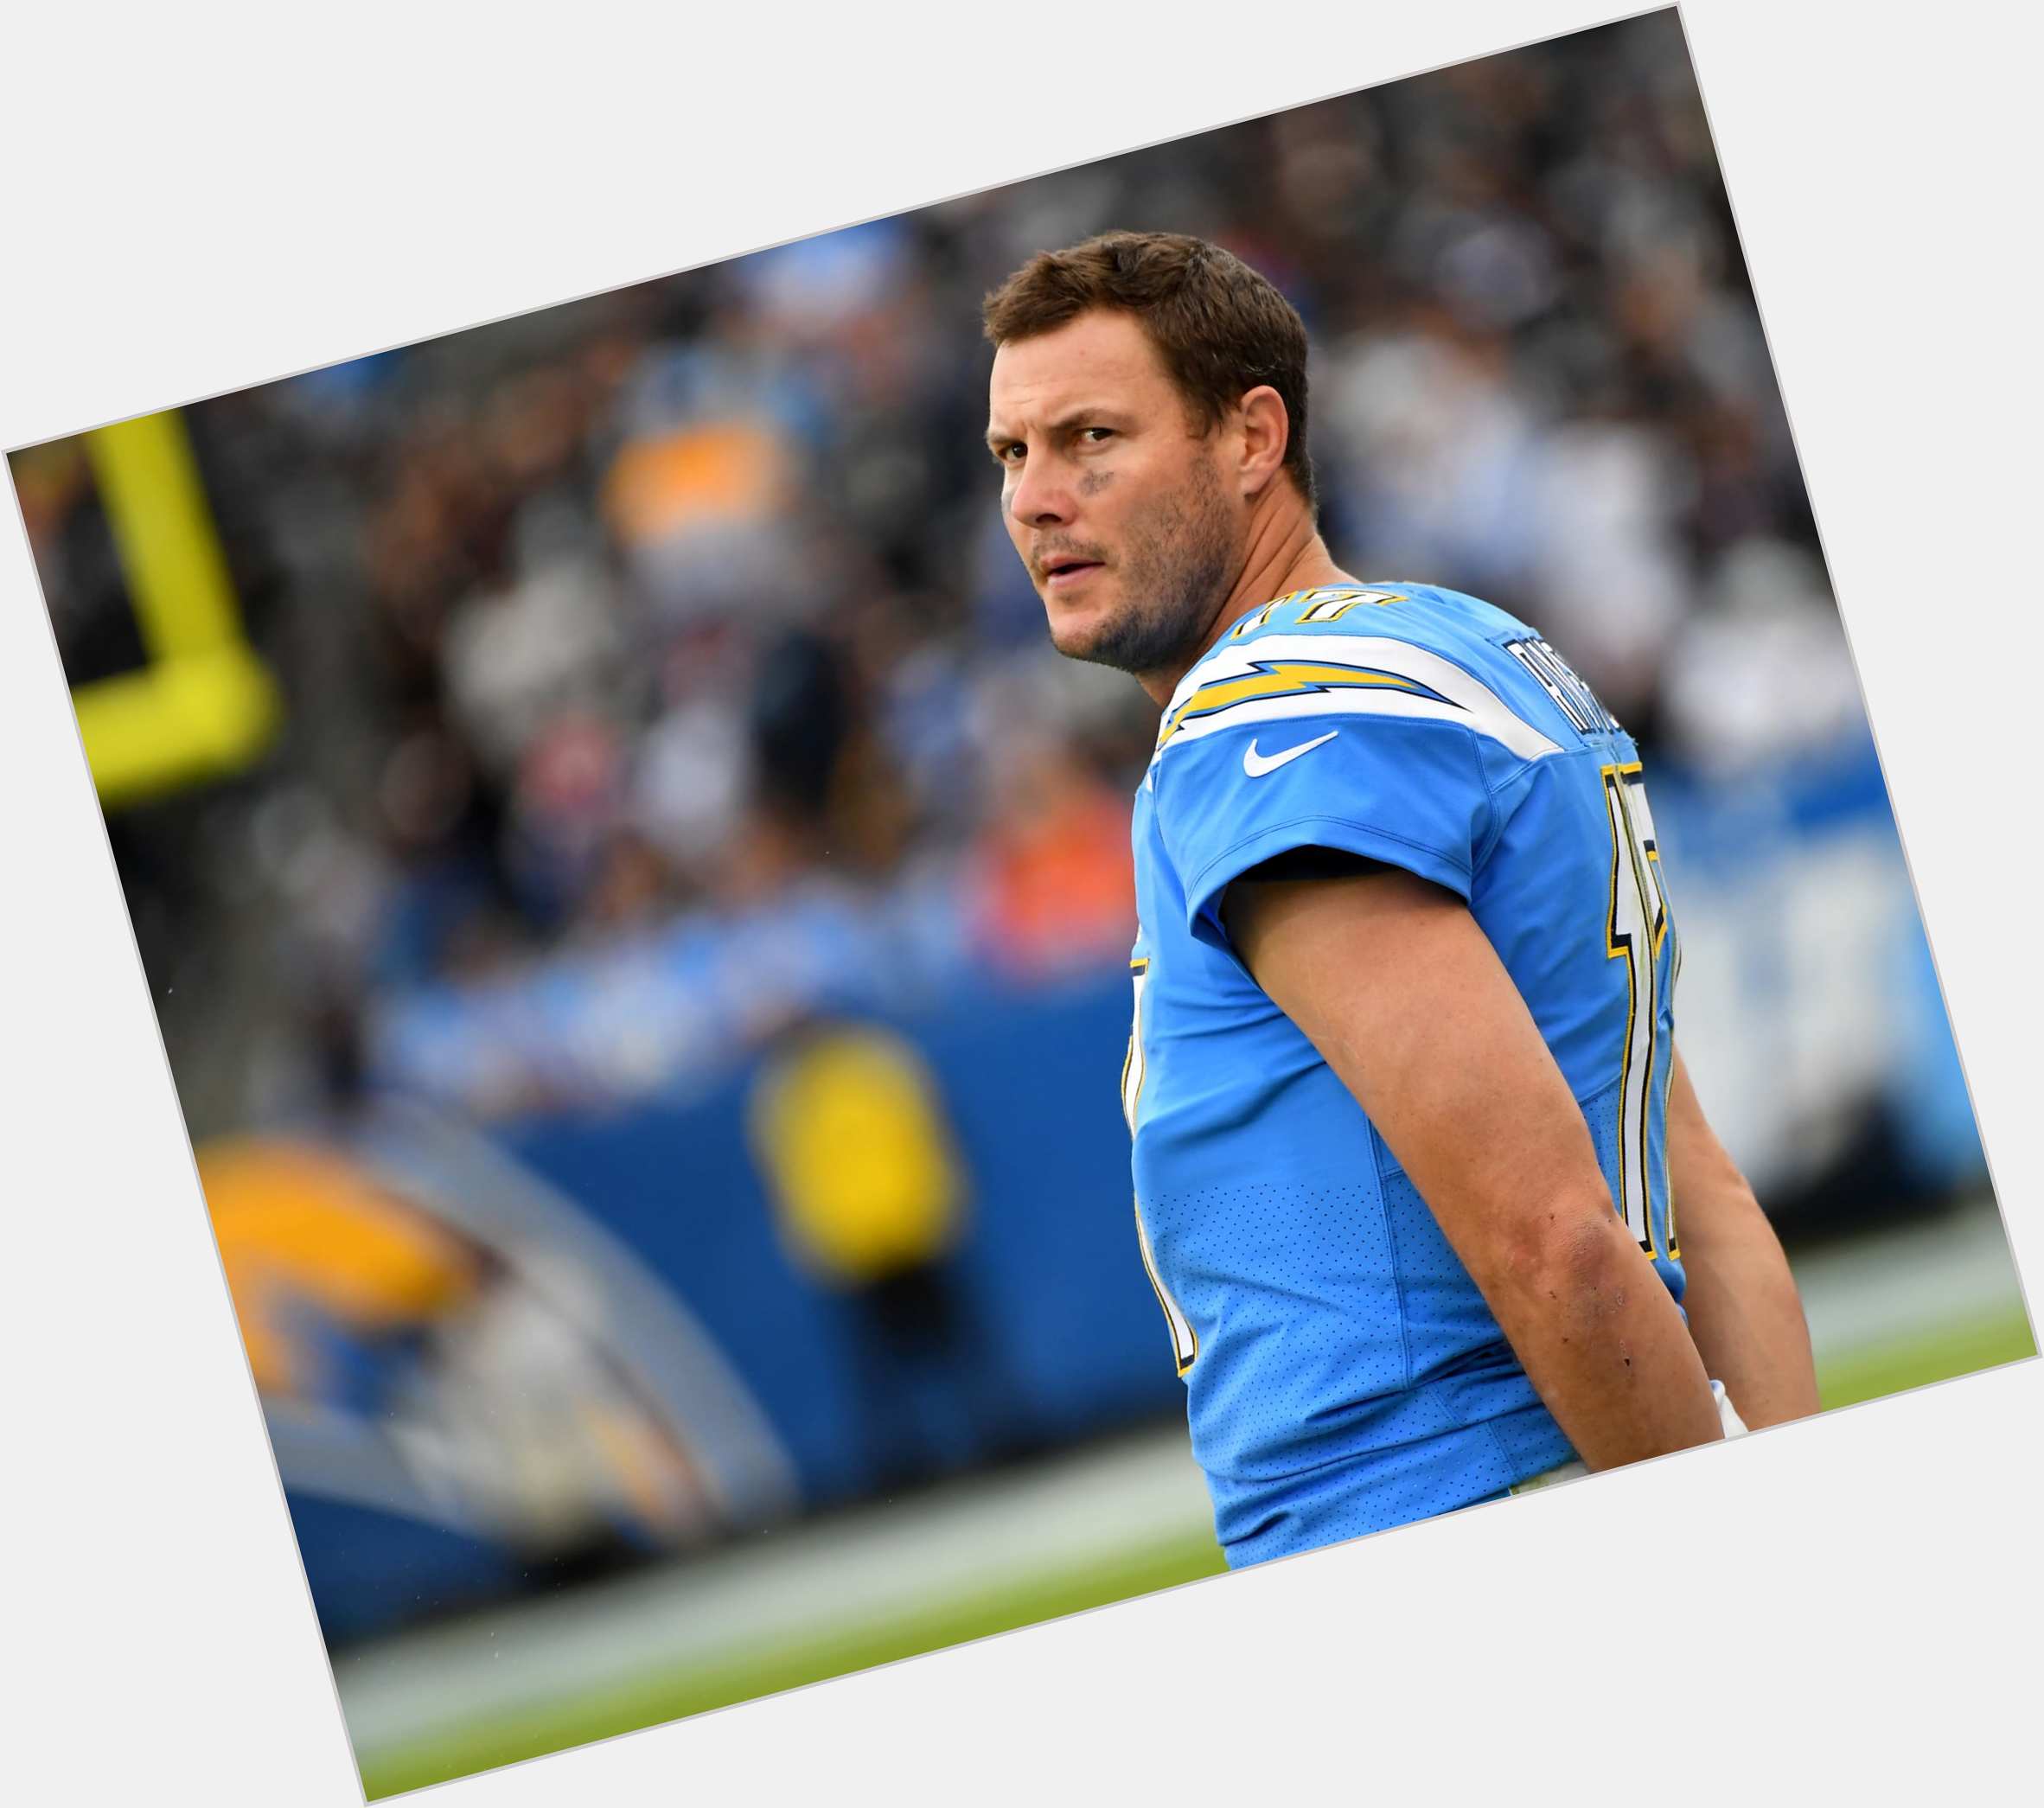 philip rivers face 1